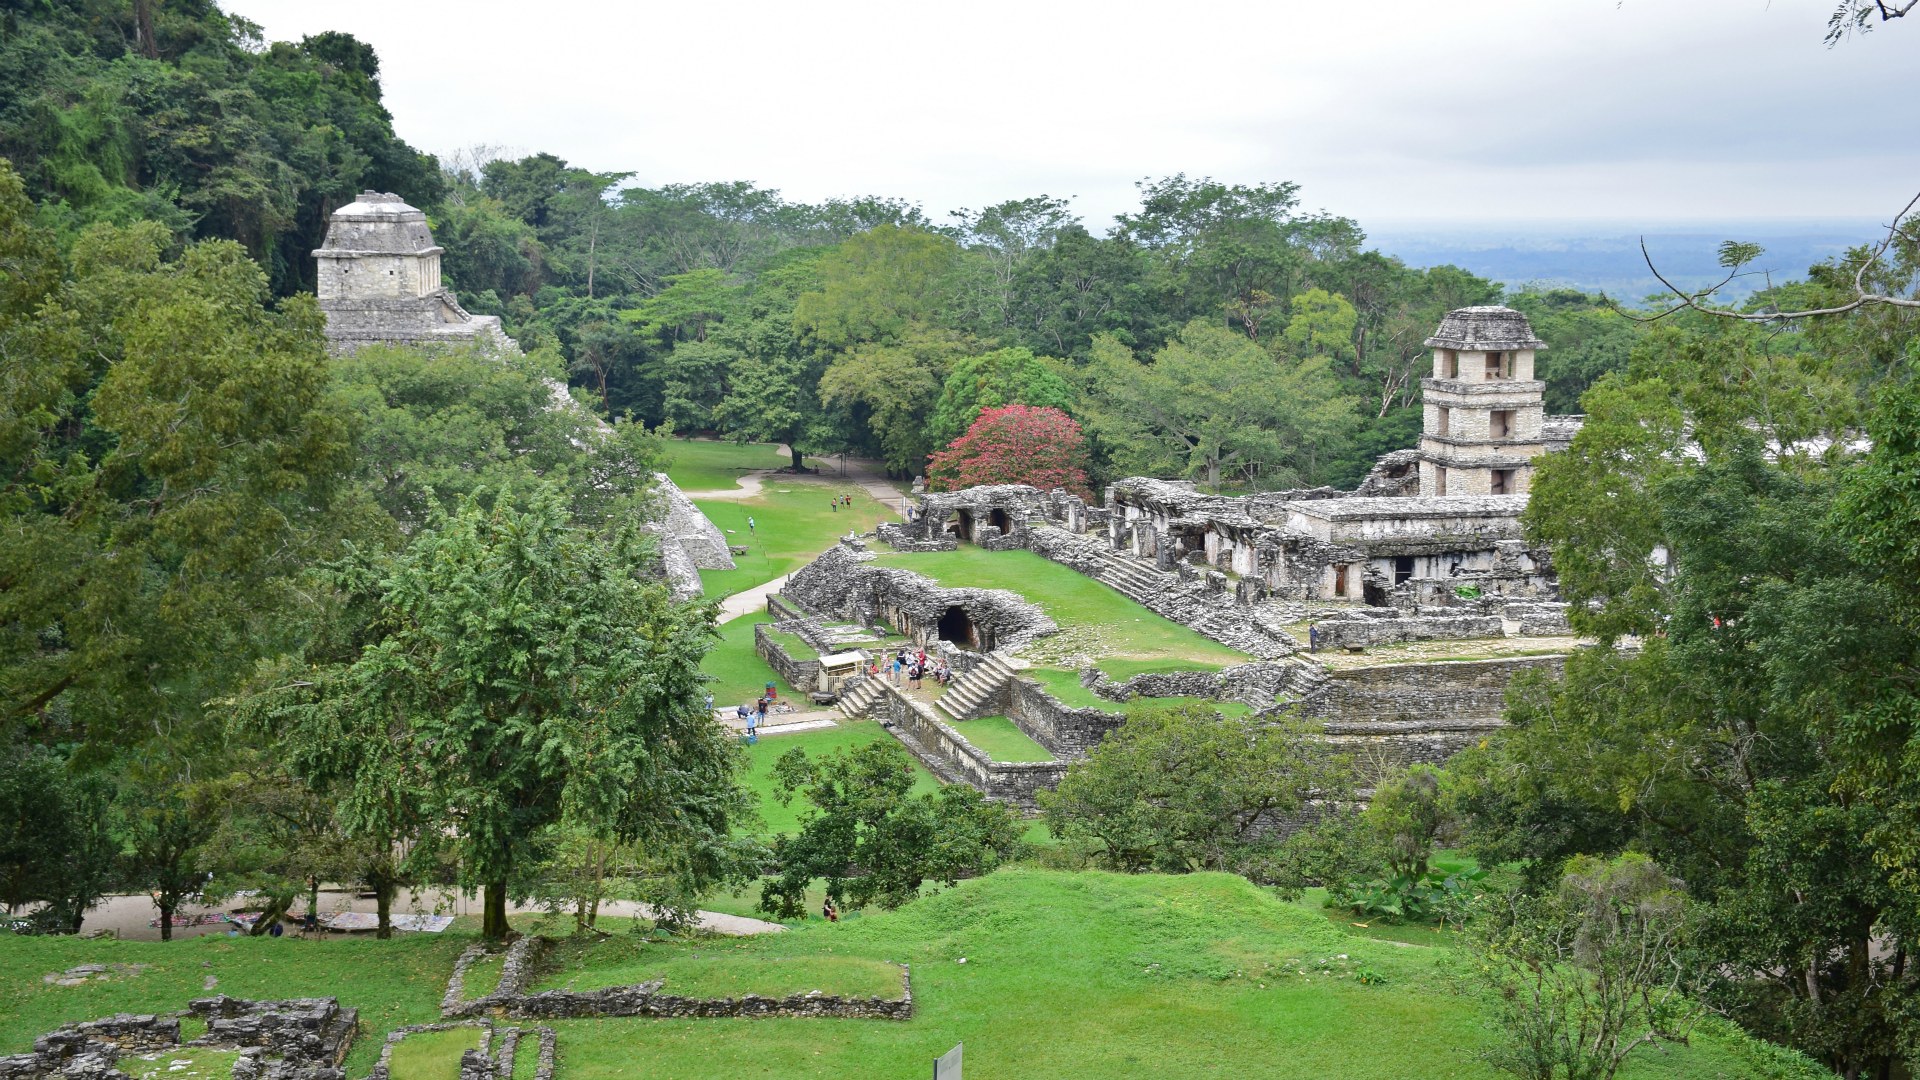 The Palace, Palenque, Mexico